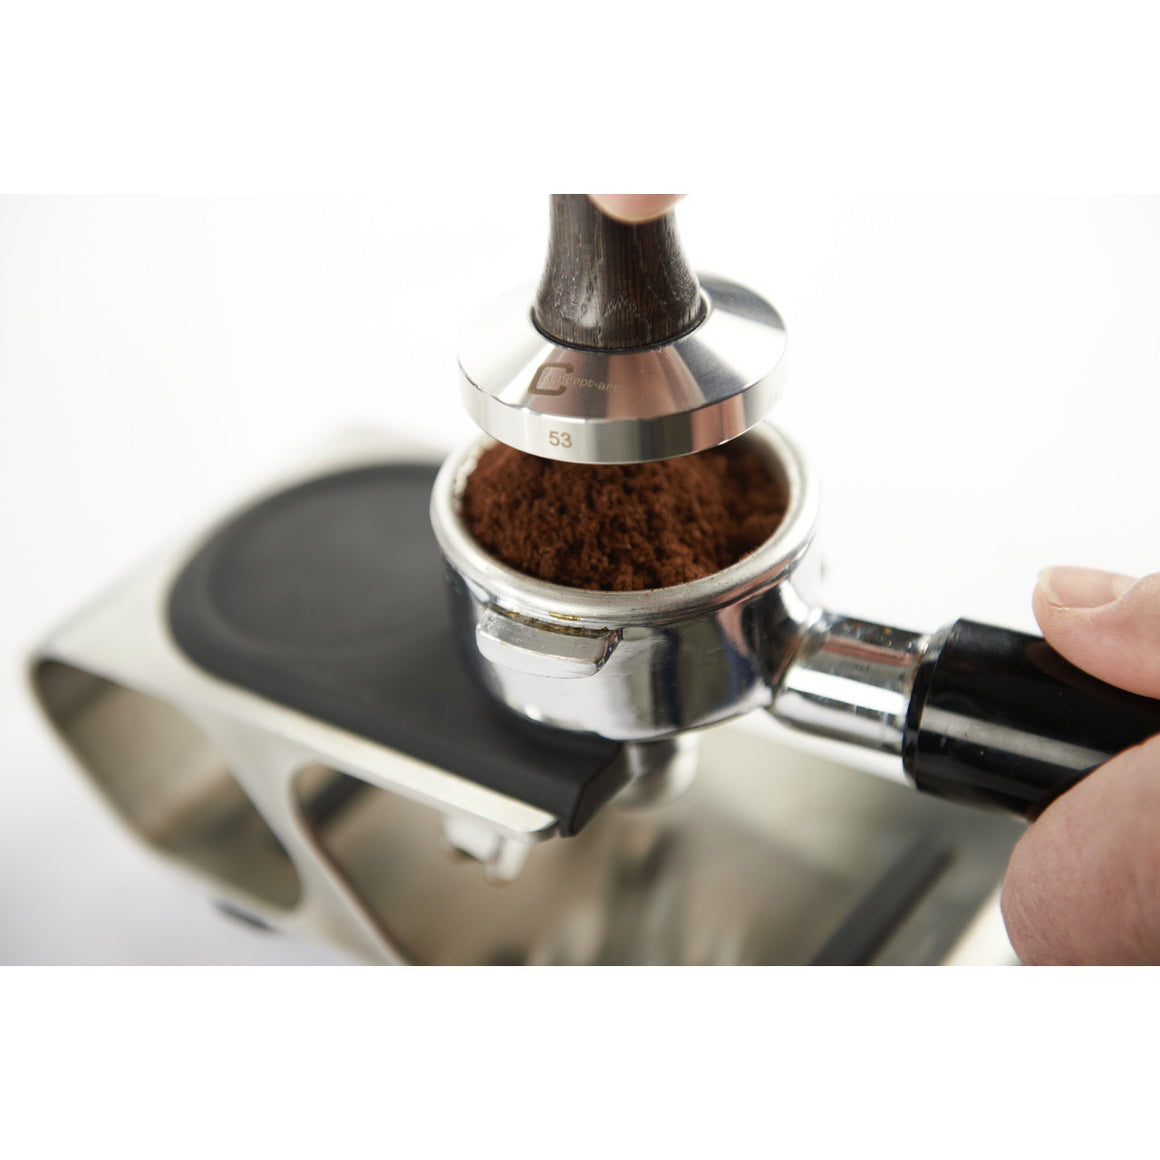 Tamping Station - Professional Up by Joe Frex - My Espresso Shop